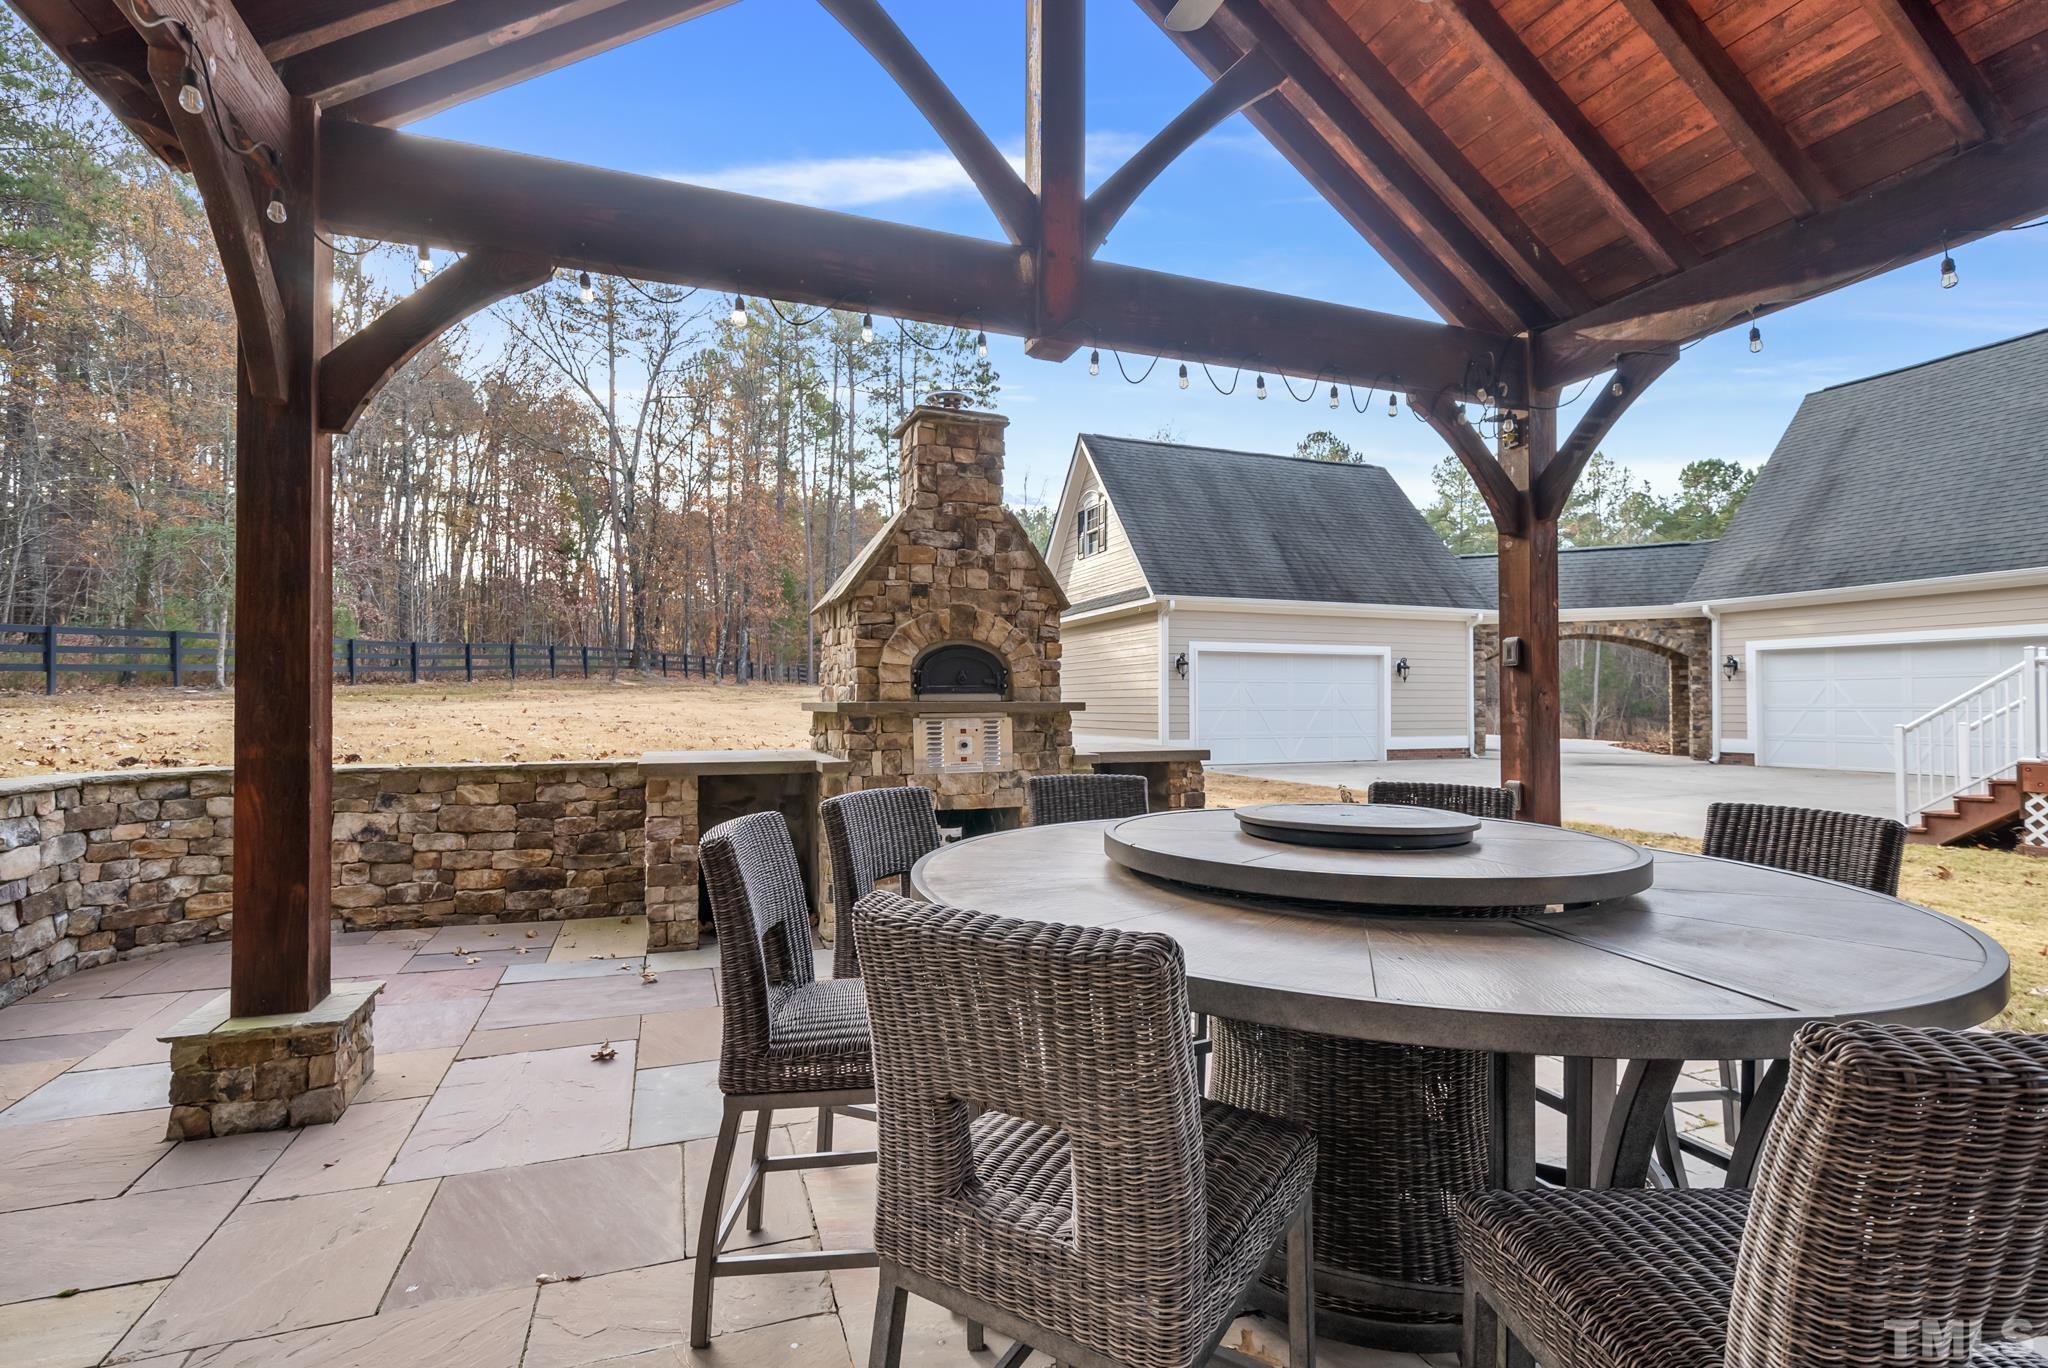 Fire pit consists of a bed of sand and firebrick, with a water drain designed to drain any water so no ash will spill onto the patio.   Brick walls around patio were built the right height to accommodate seating for guests